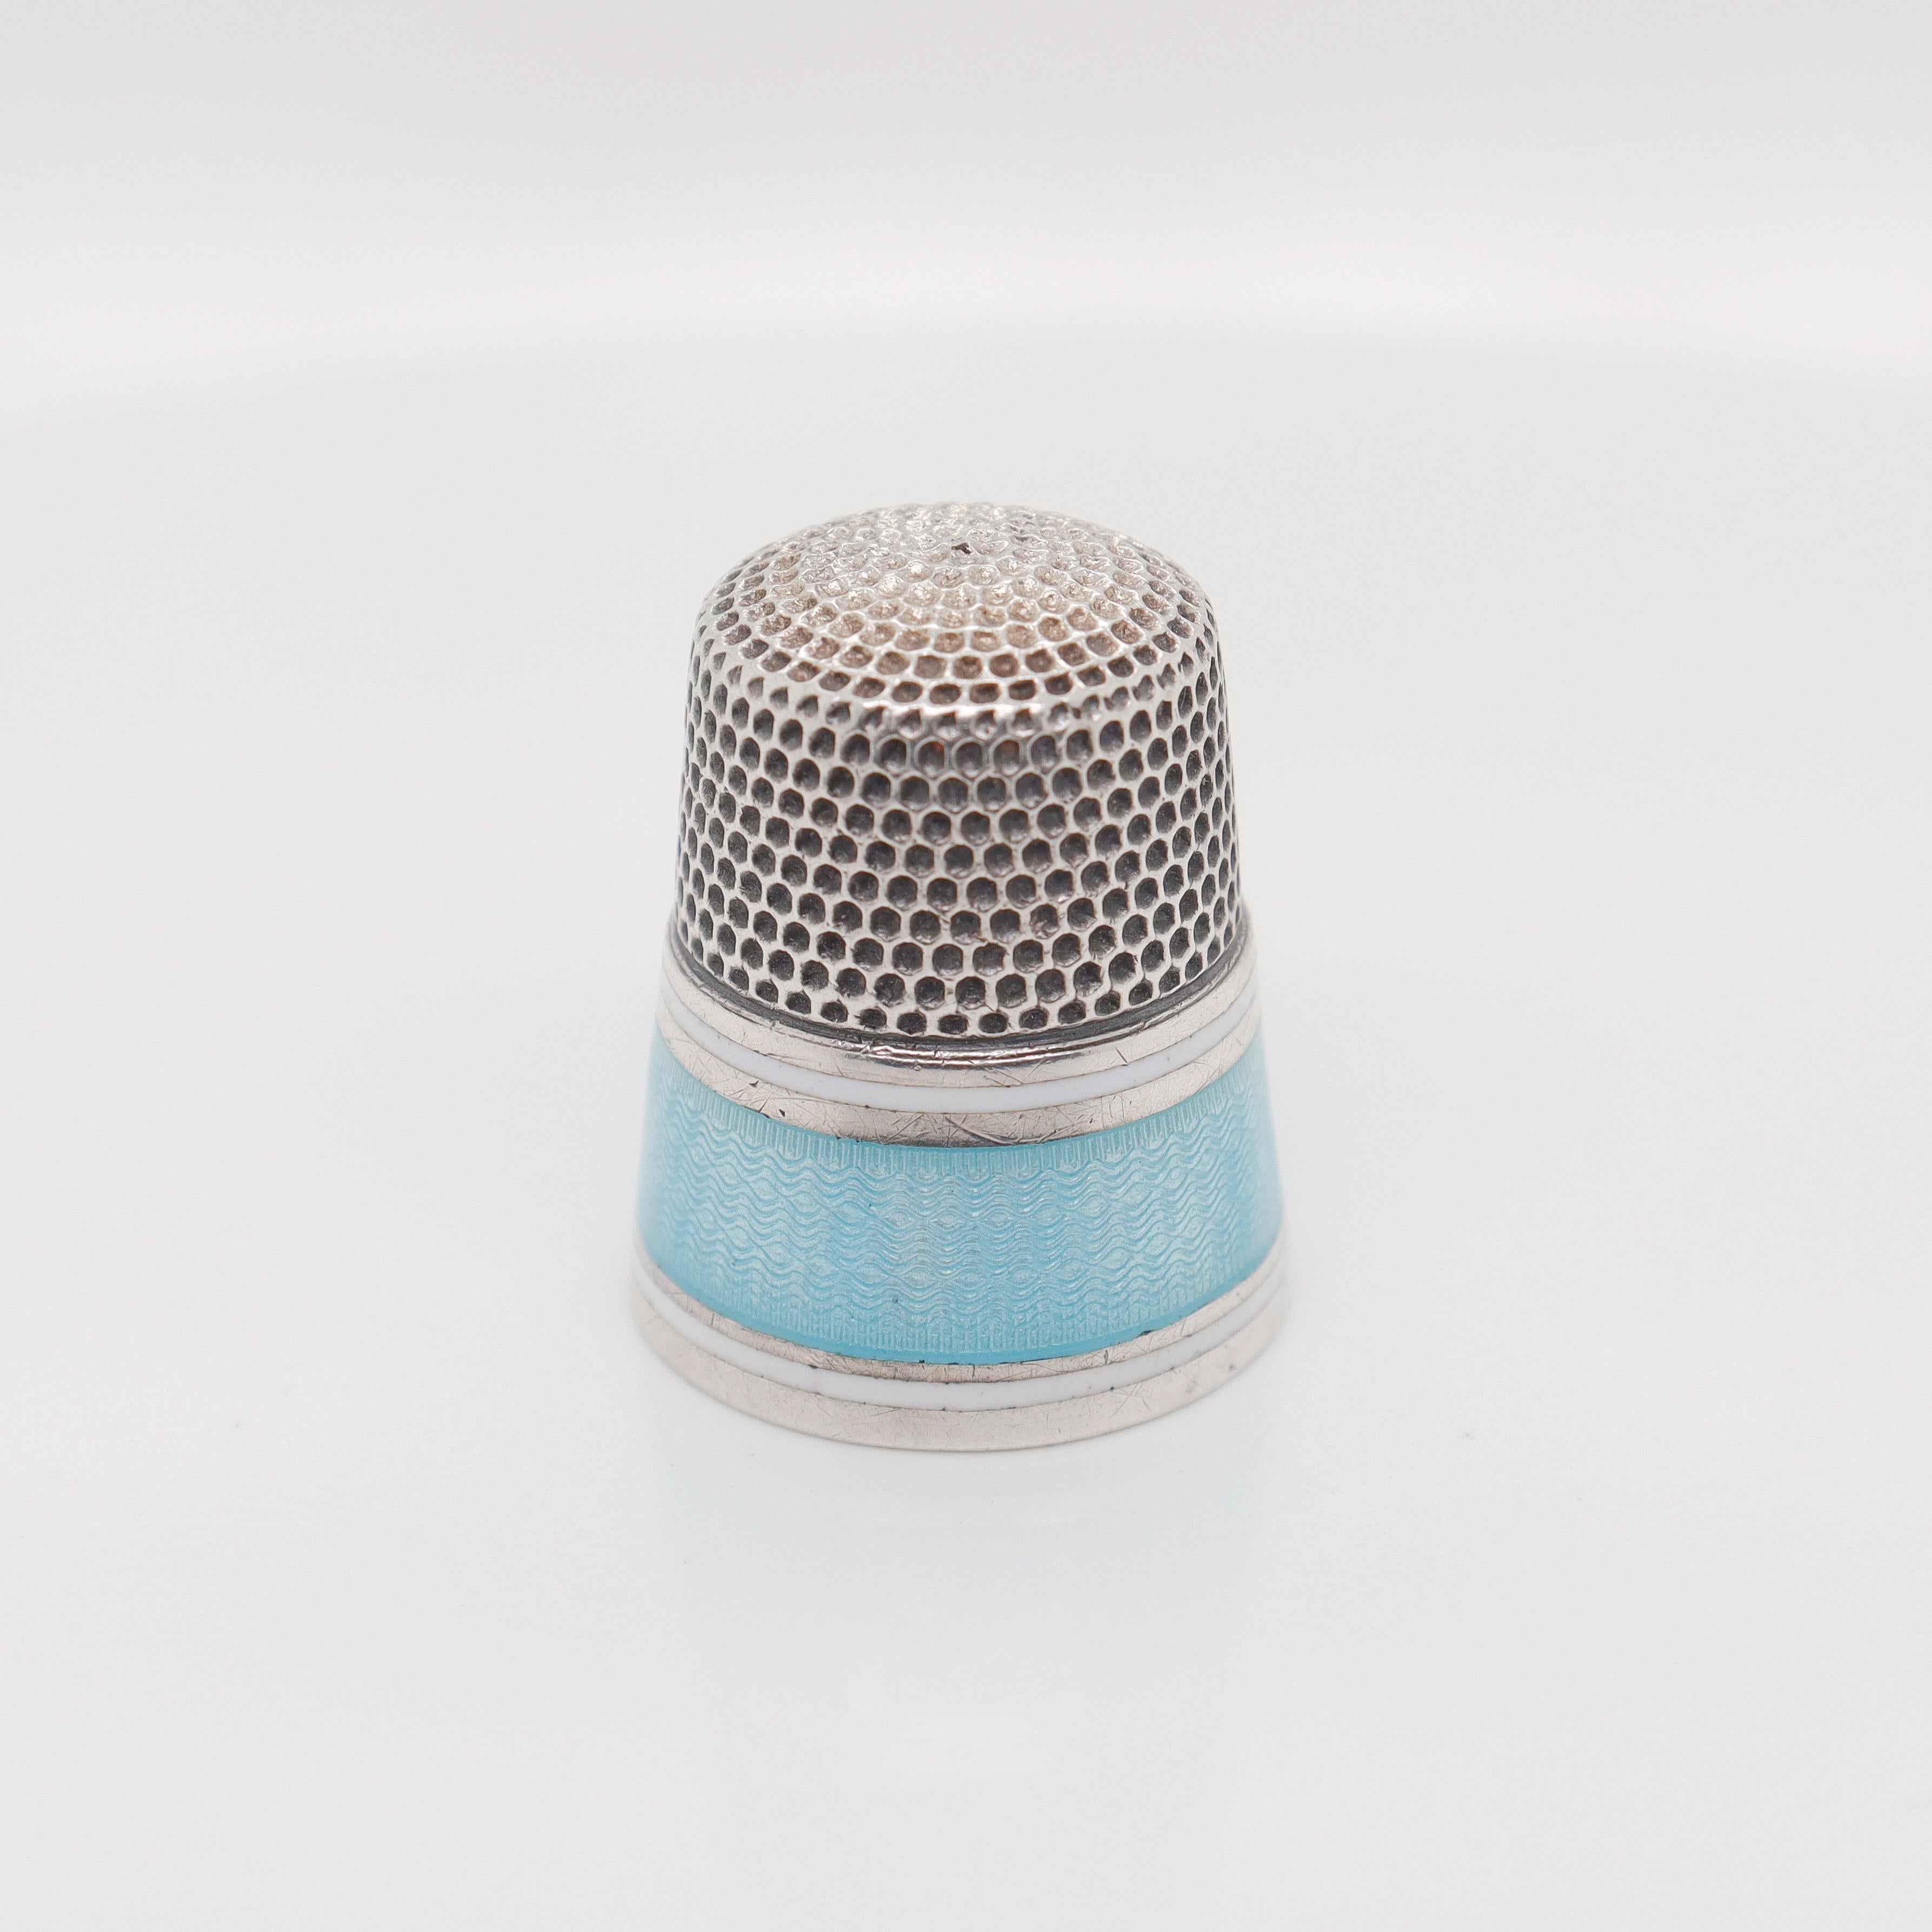 picture of a sewing thimble